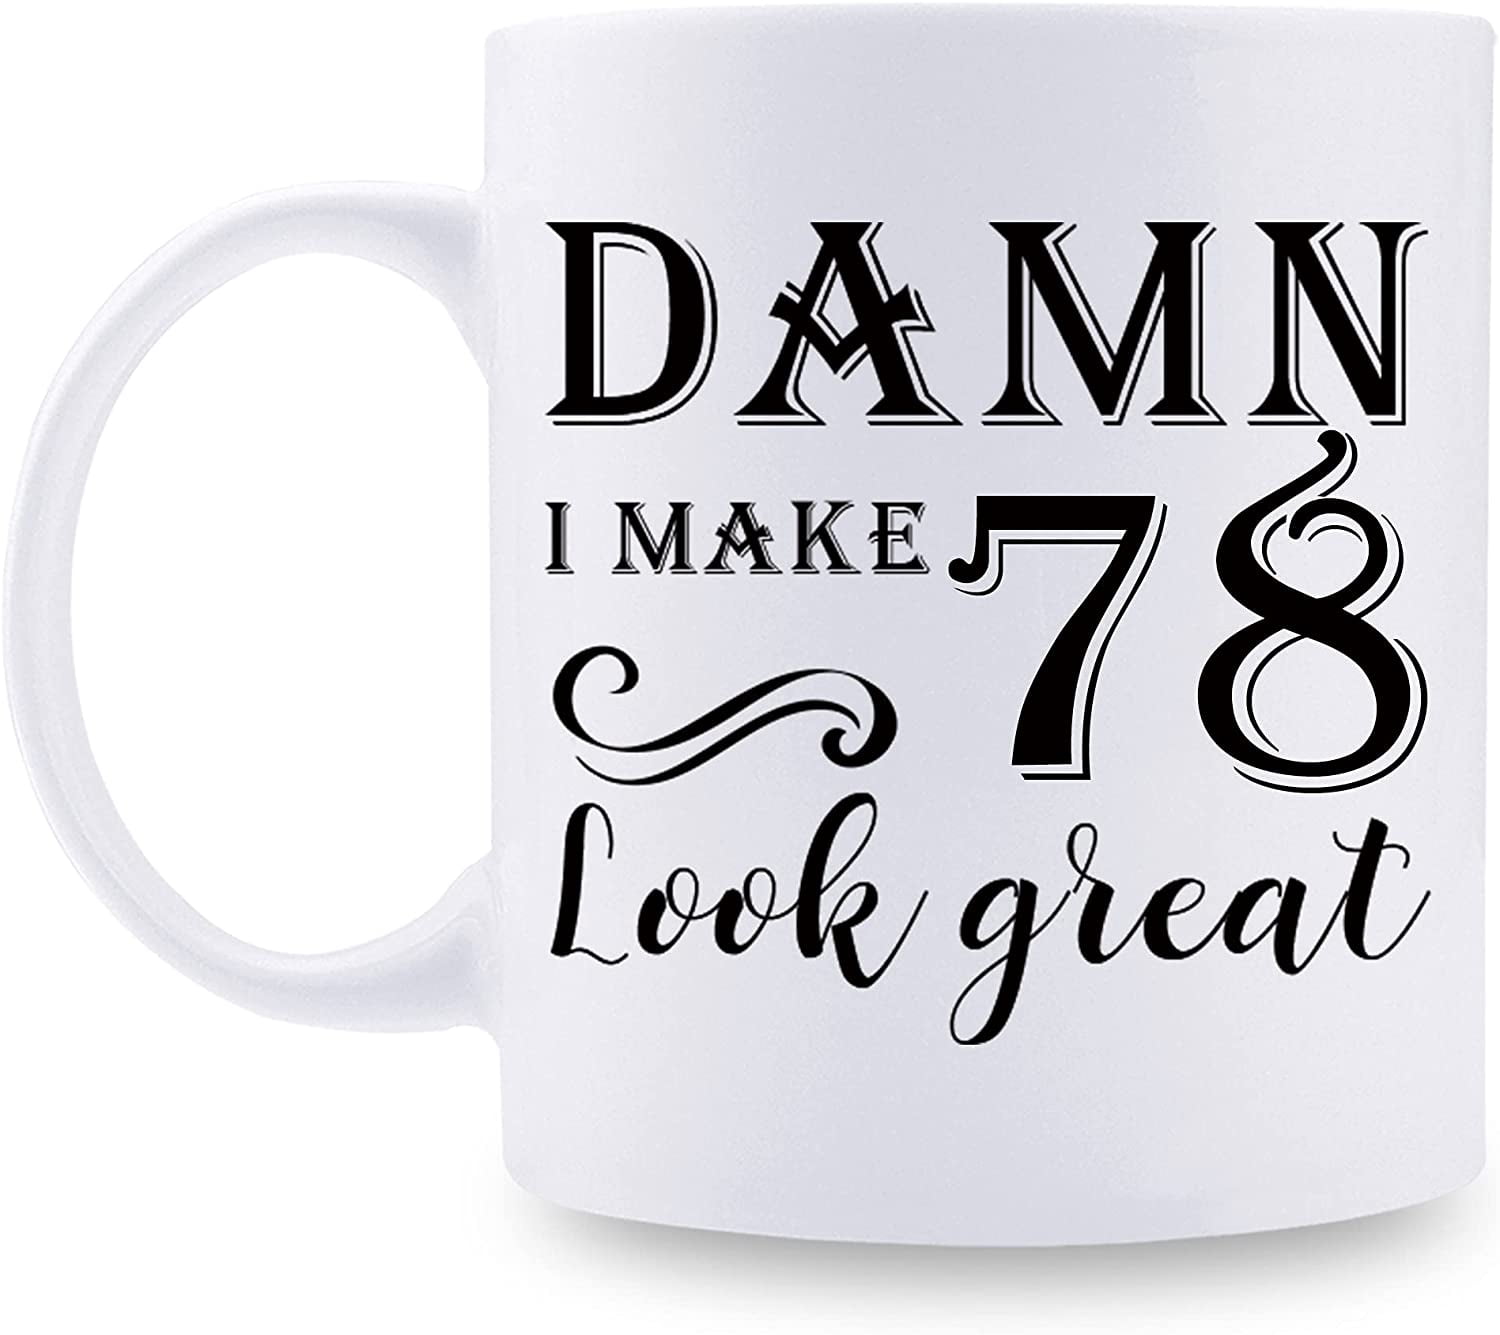 38 Gifts for Your Boyfriend's Mom That Will Make Her Melt - Groovy